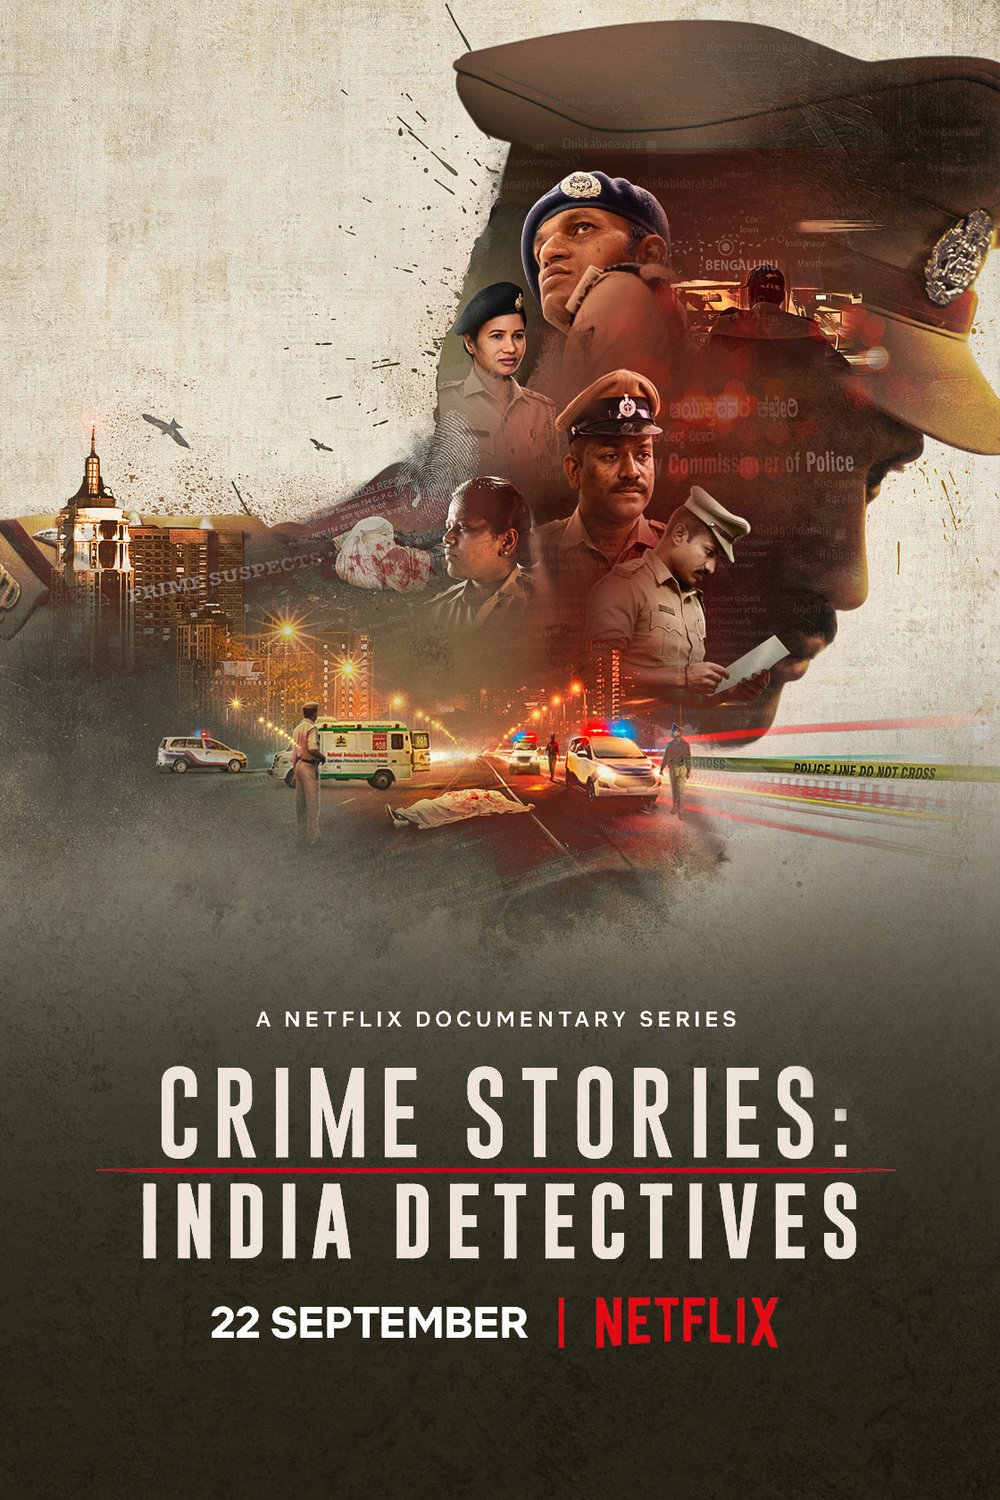 Kannada poster of the movie Crime Stories: India Detectives